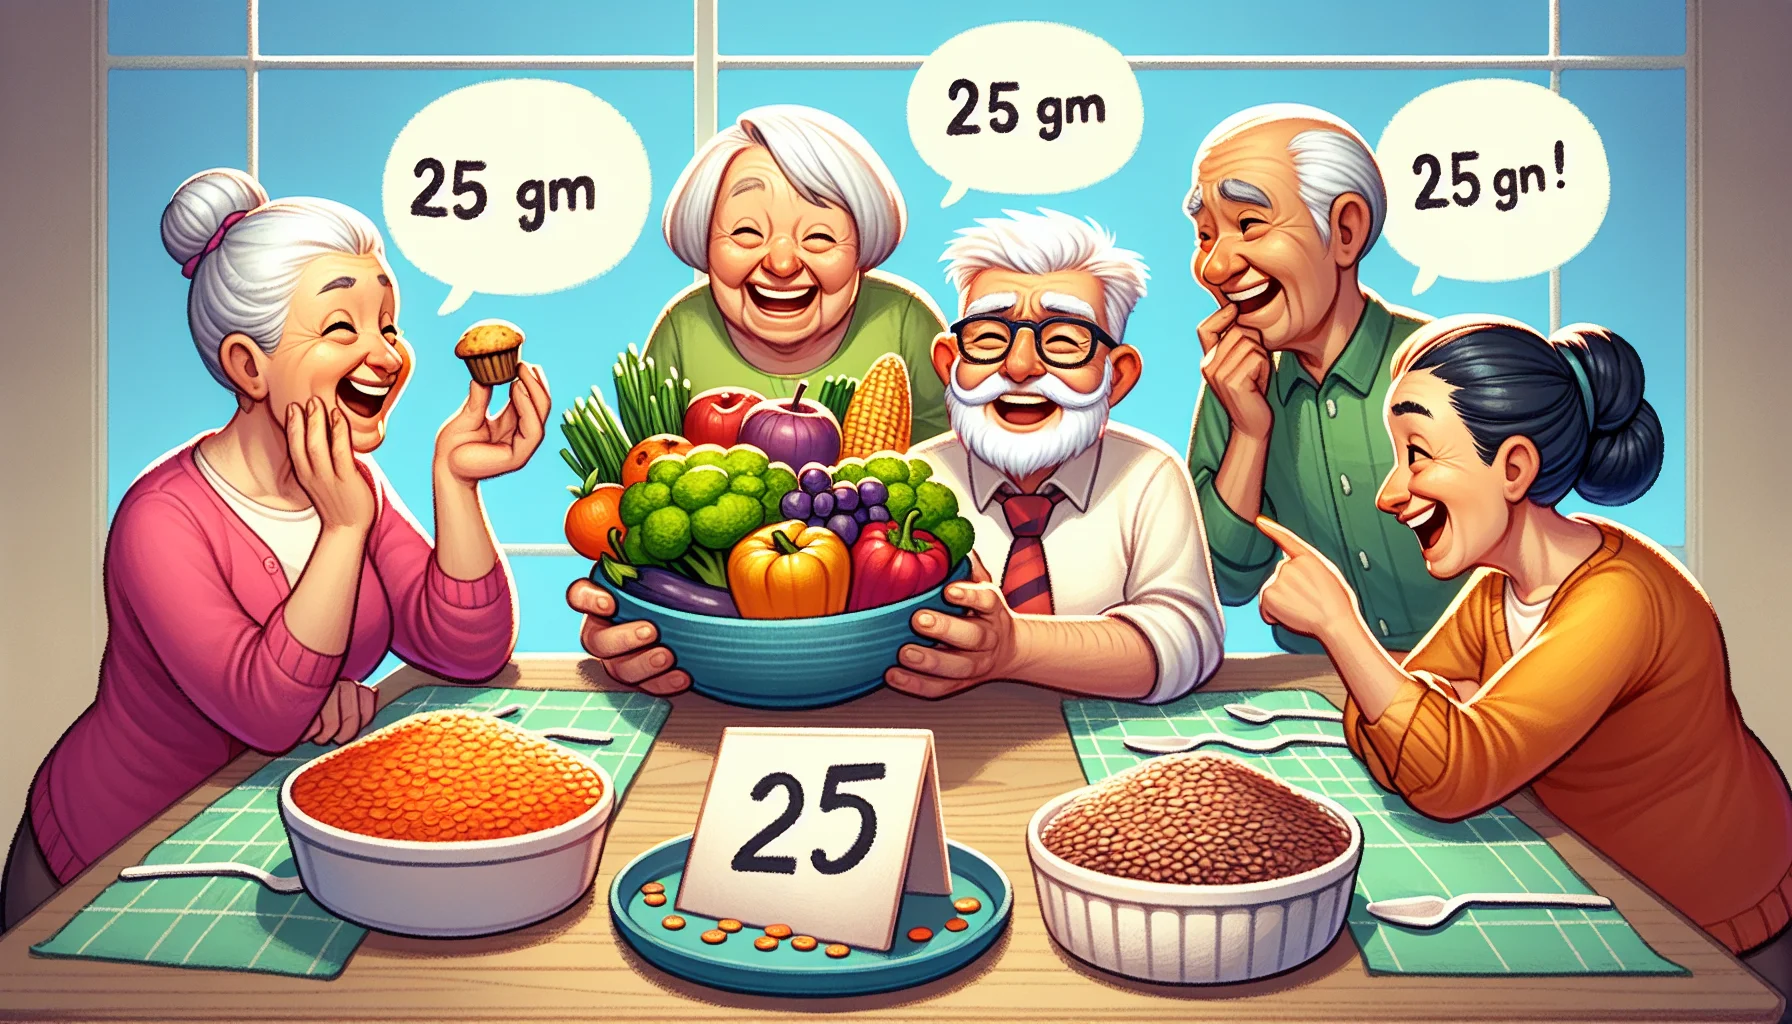 Illustrate an amusing scene where a group of senior citizens are comparing 25 grams of fiber in their respective diets. An elderly Caucasian woman proudly displays a large bowl of brightly colored fruits and vegetables. An elderly Hispanic man shows off a plate of whole grain breads and cereals, while a South Asian woman chuckles with a pot full of lentils. In contrast, a Middle-Eastern gentleman humorously holds a tiny bran muffin, quipping about his simpler approach to healthy eating. Highlight the hilarity and jovial friendship between the elderly people sharing their healthy lifestyle.